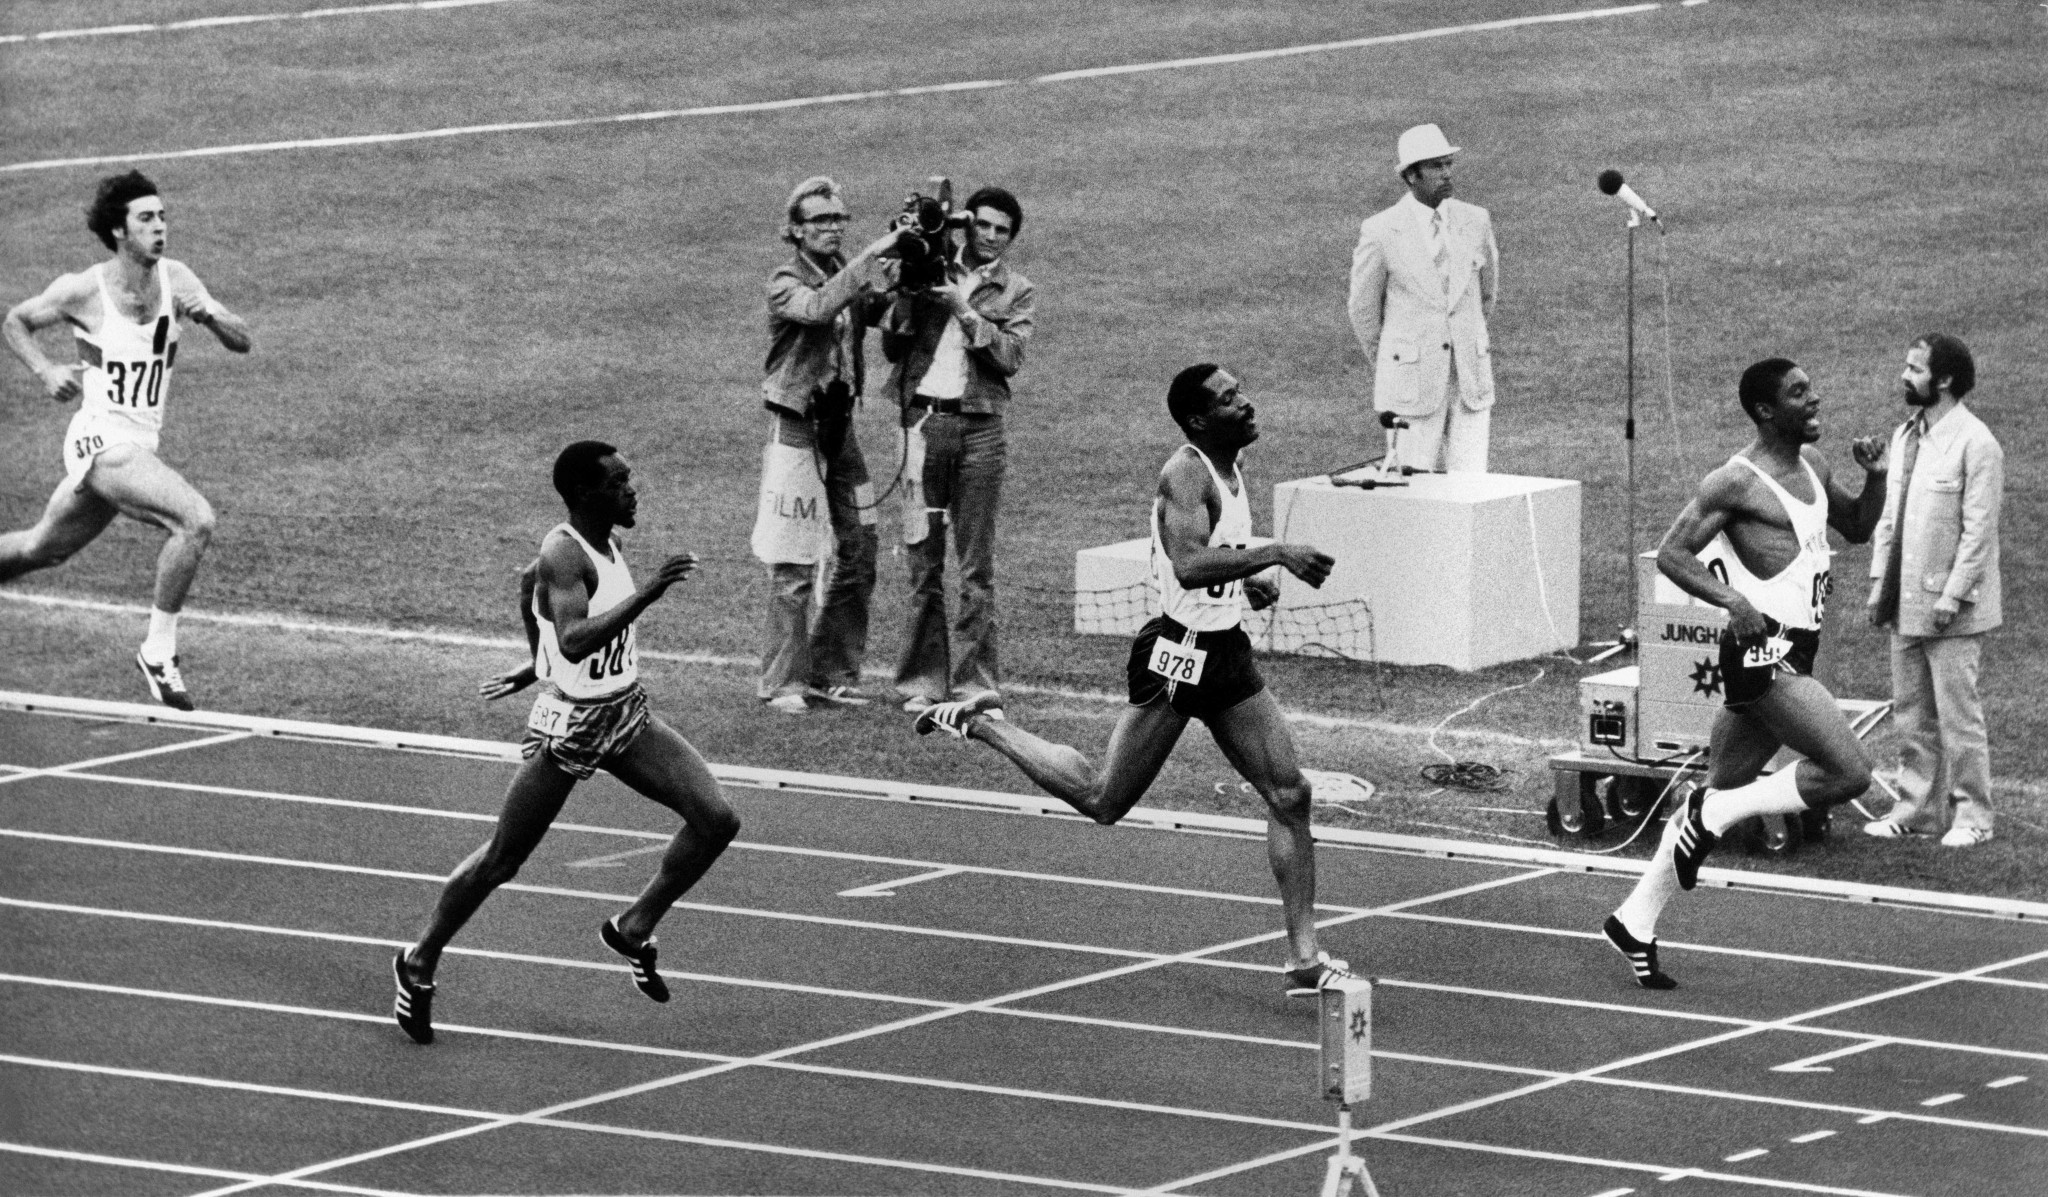 Vince Matthews won the Munich 1972 400m gold medal, but his actions at the medal ceremony led to a life ban from the Olympics ©Getty Images